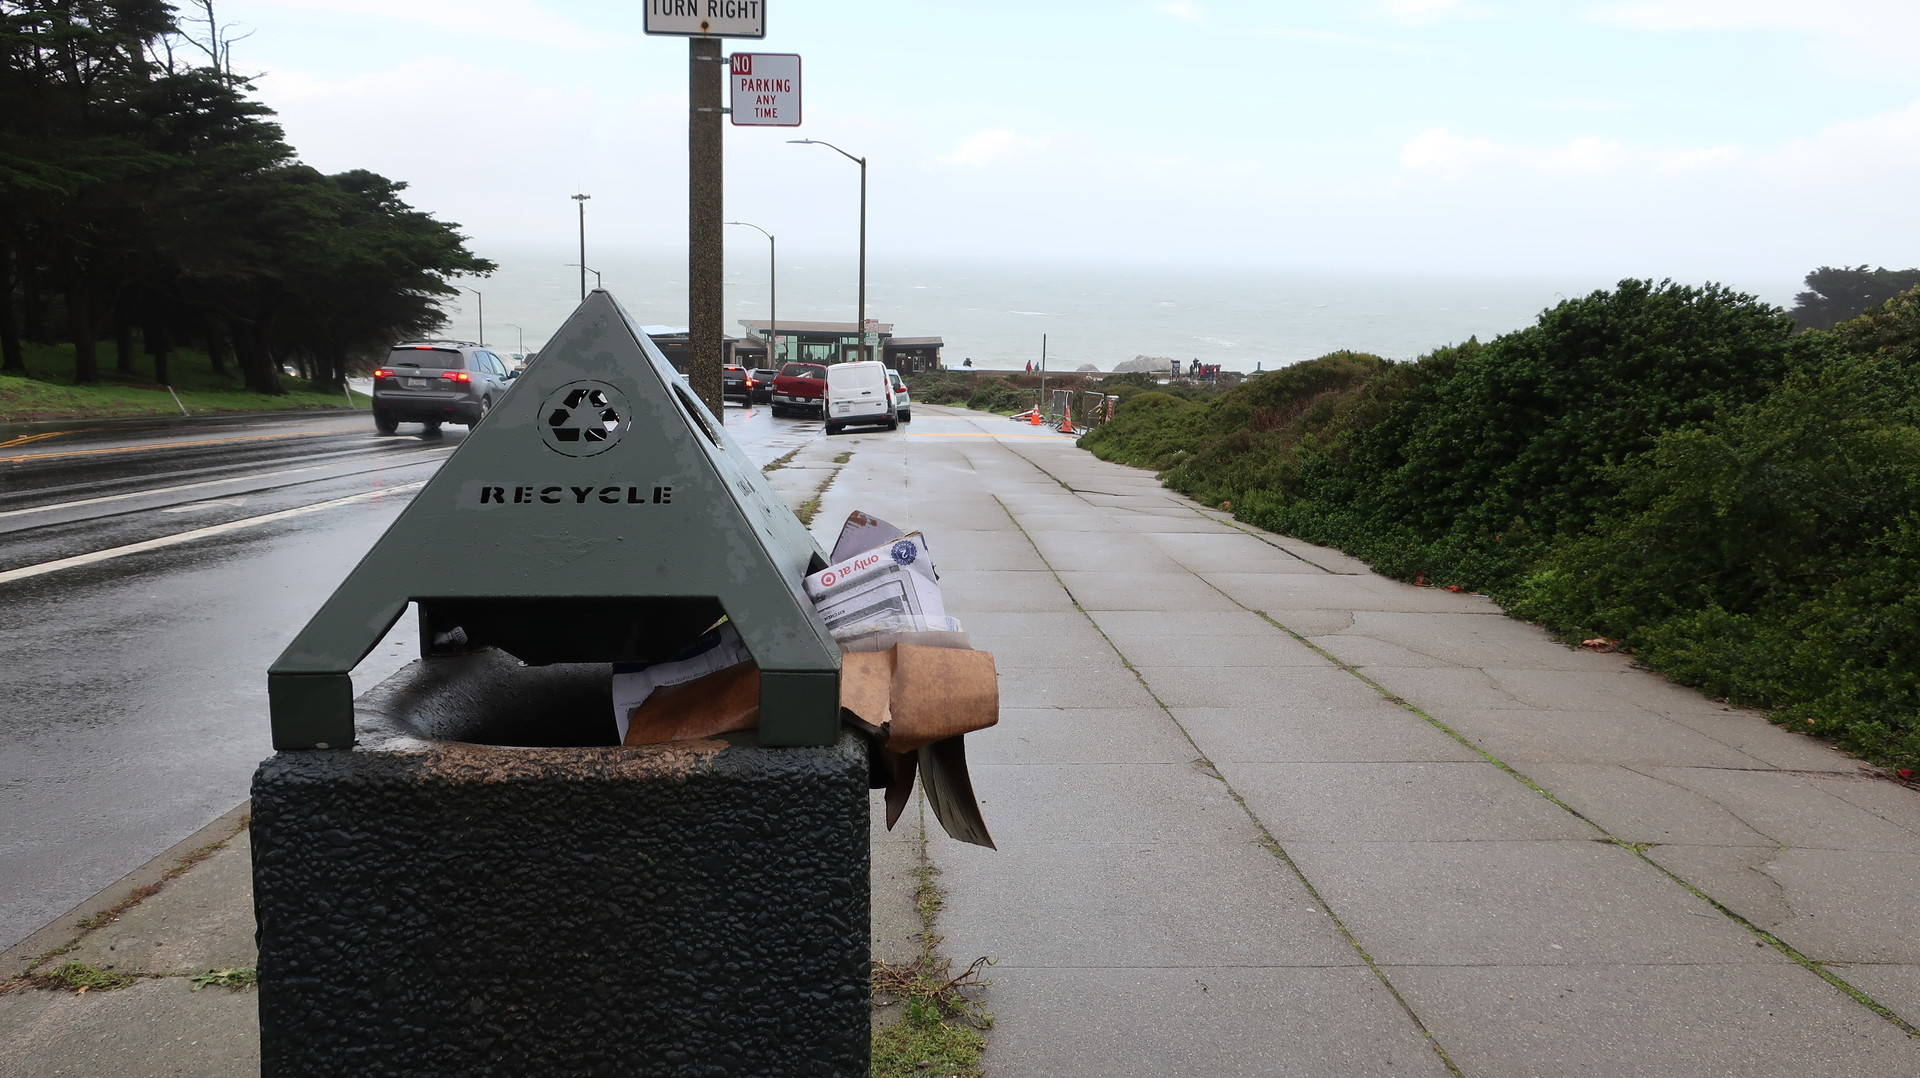 Recycling is stuffed into a bin at Lands End in San Francisco on Jan. 5, 2018. Reps. Jackie Speier and Jared Huffman gathered with volunteers to collect trash at Lands End and Ocean Beach during the government shutdown. Michelle Wiley/KQED